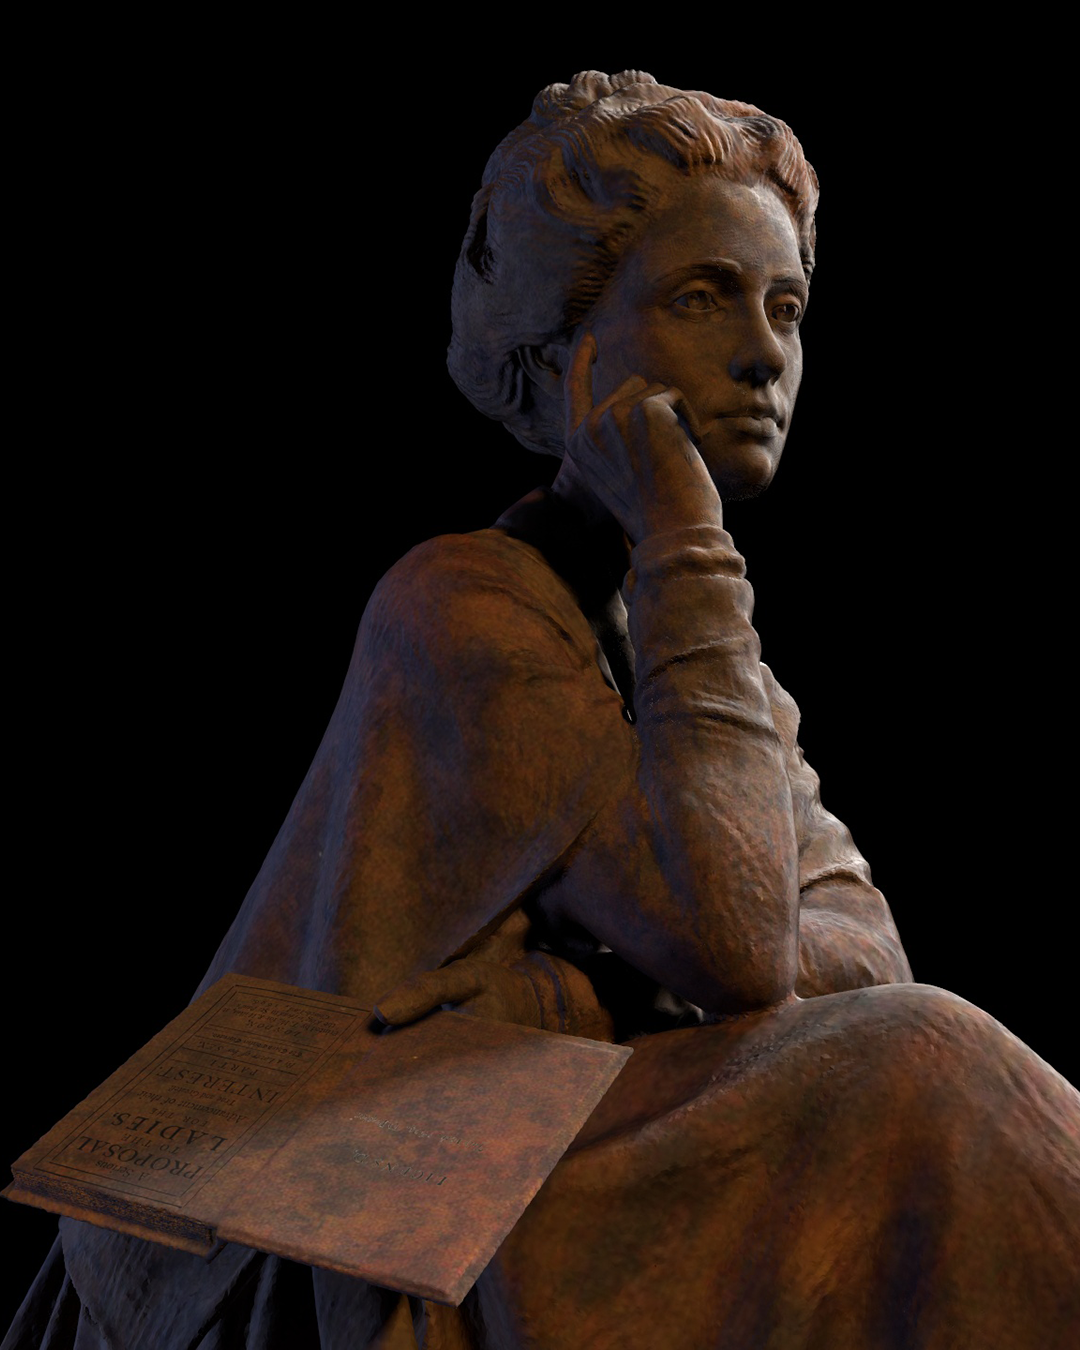 Mary-Astell-statue/Rendering-of-Mary-Astell-statue-modeled-by-Emil-Sole-9.webp